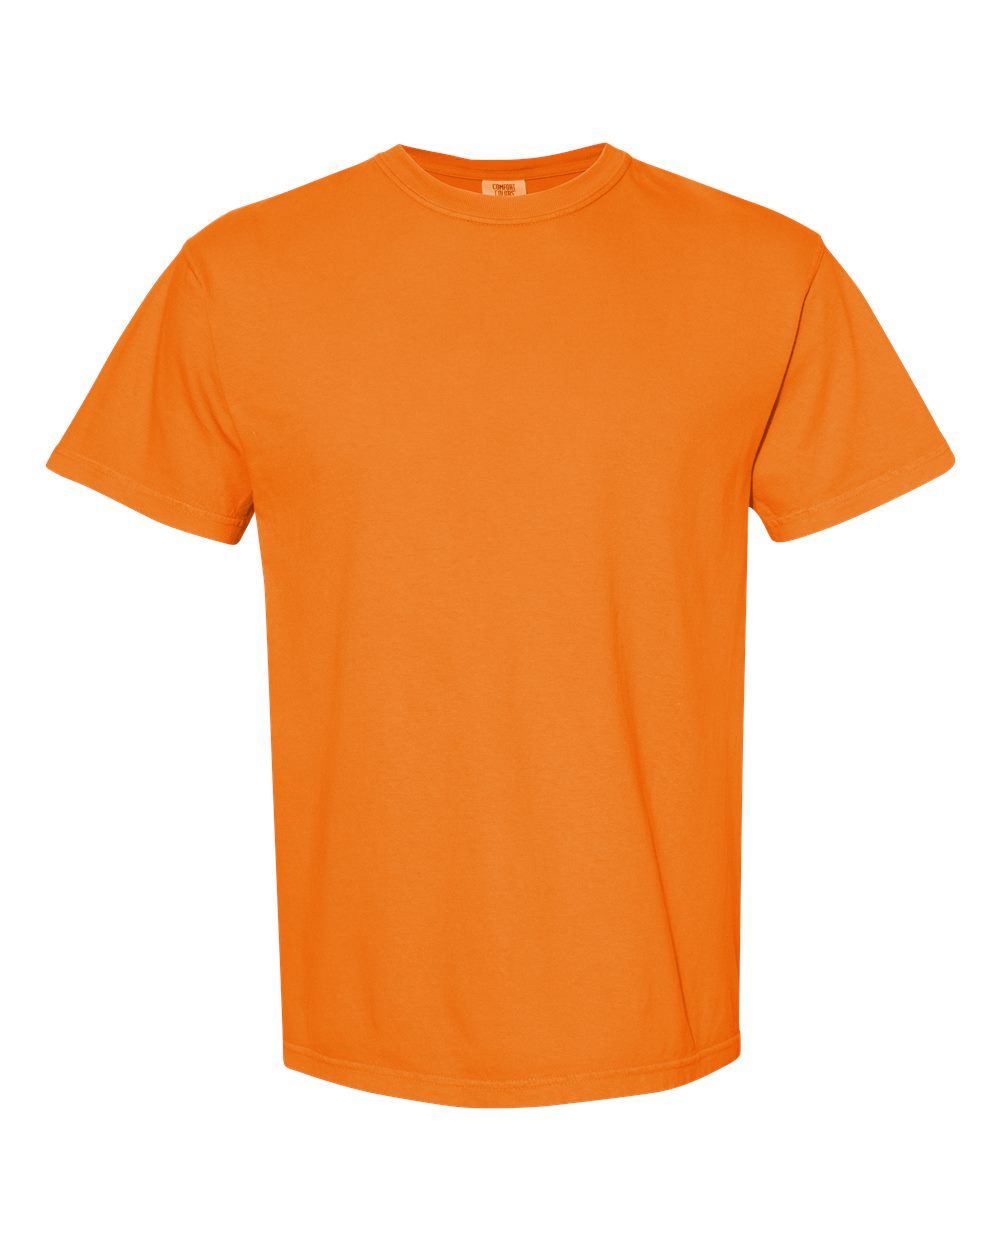 Comfort Colors Garment-Dyed Tee (1717) in Bright Orange